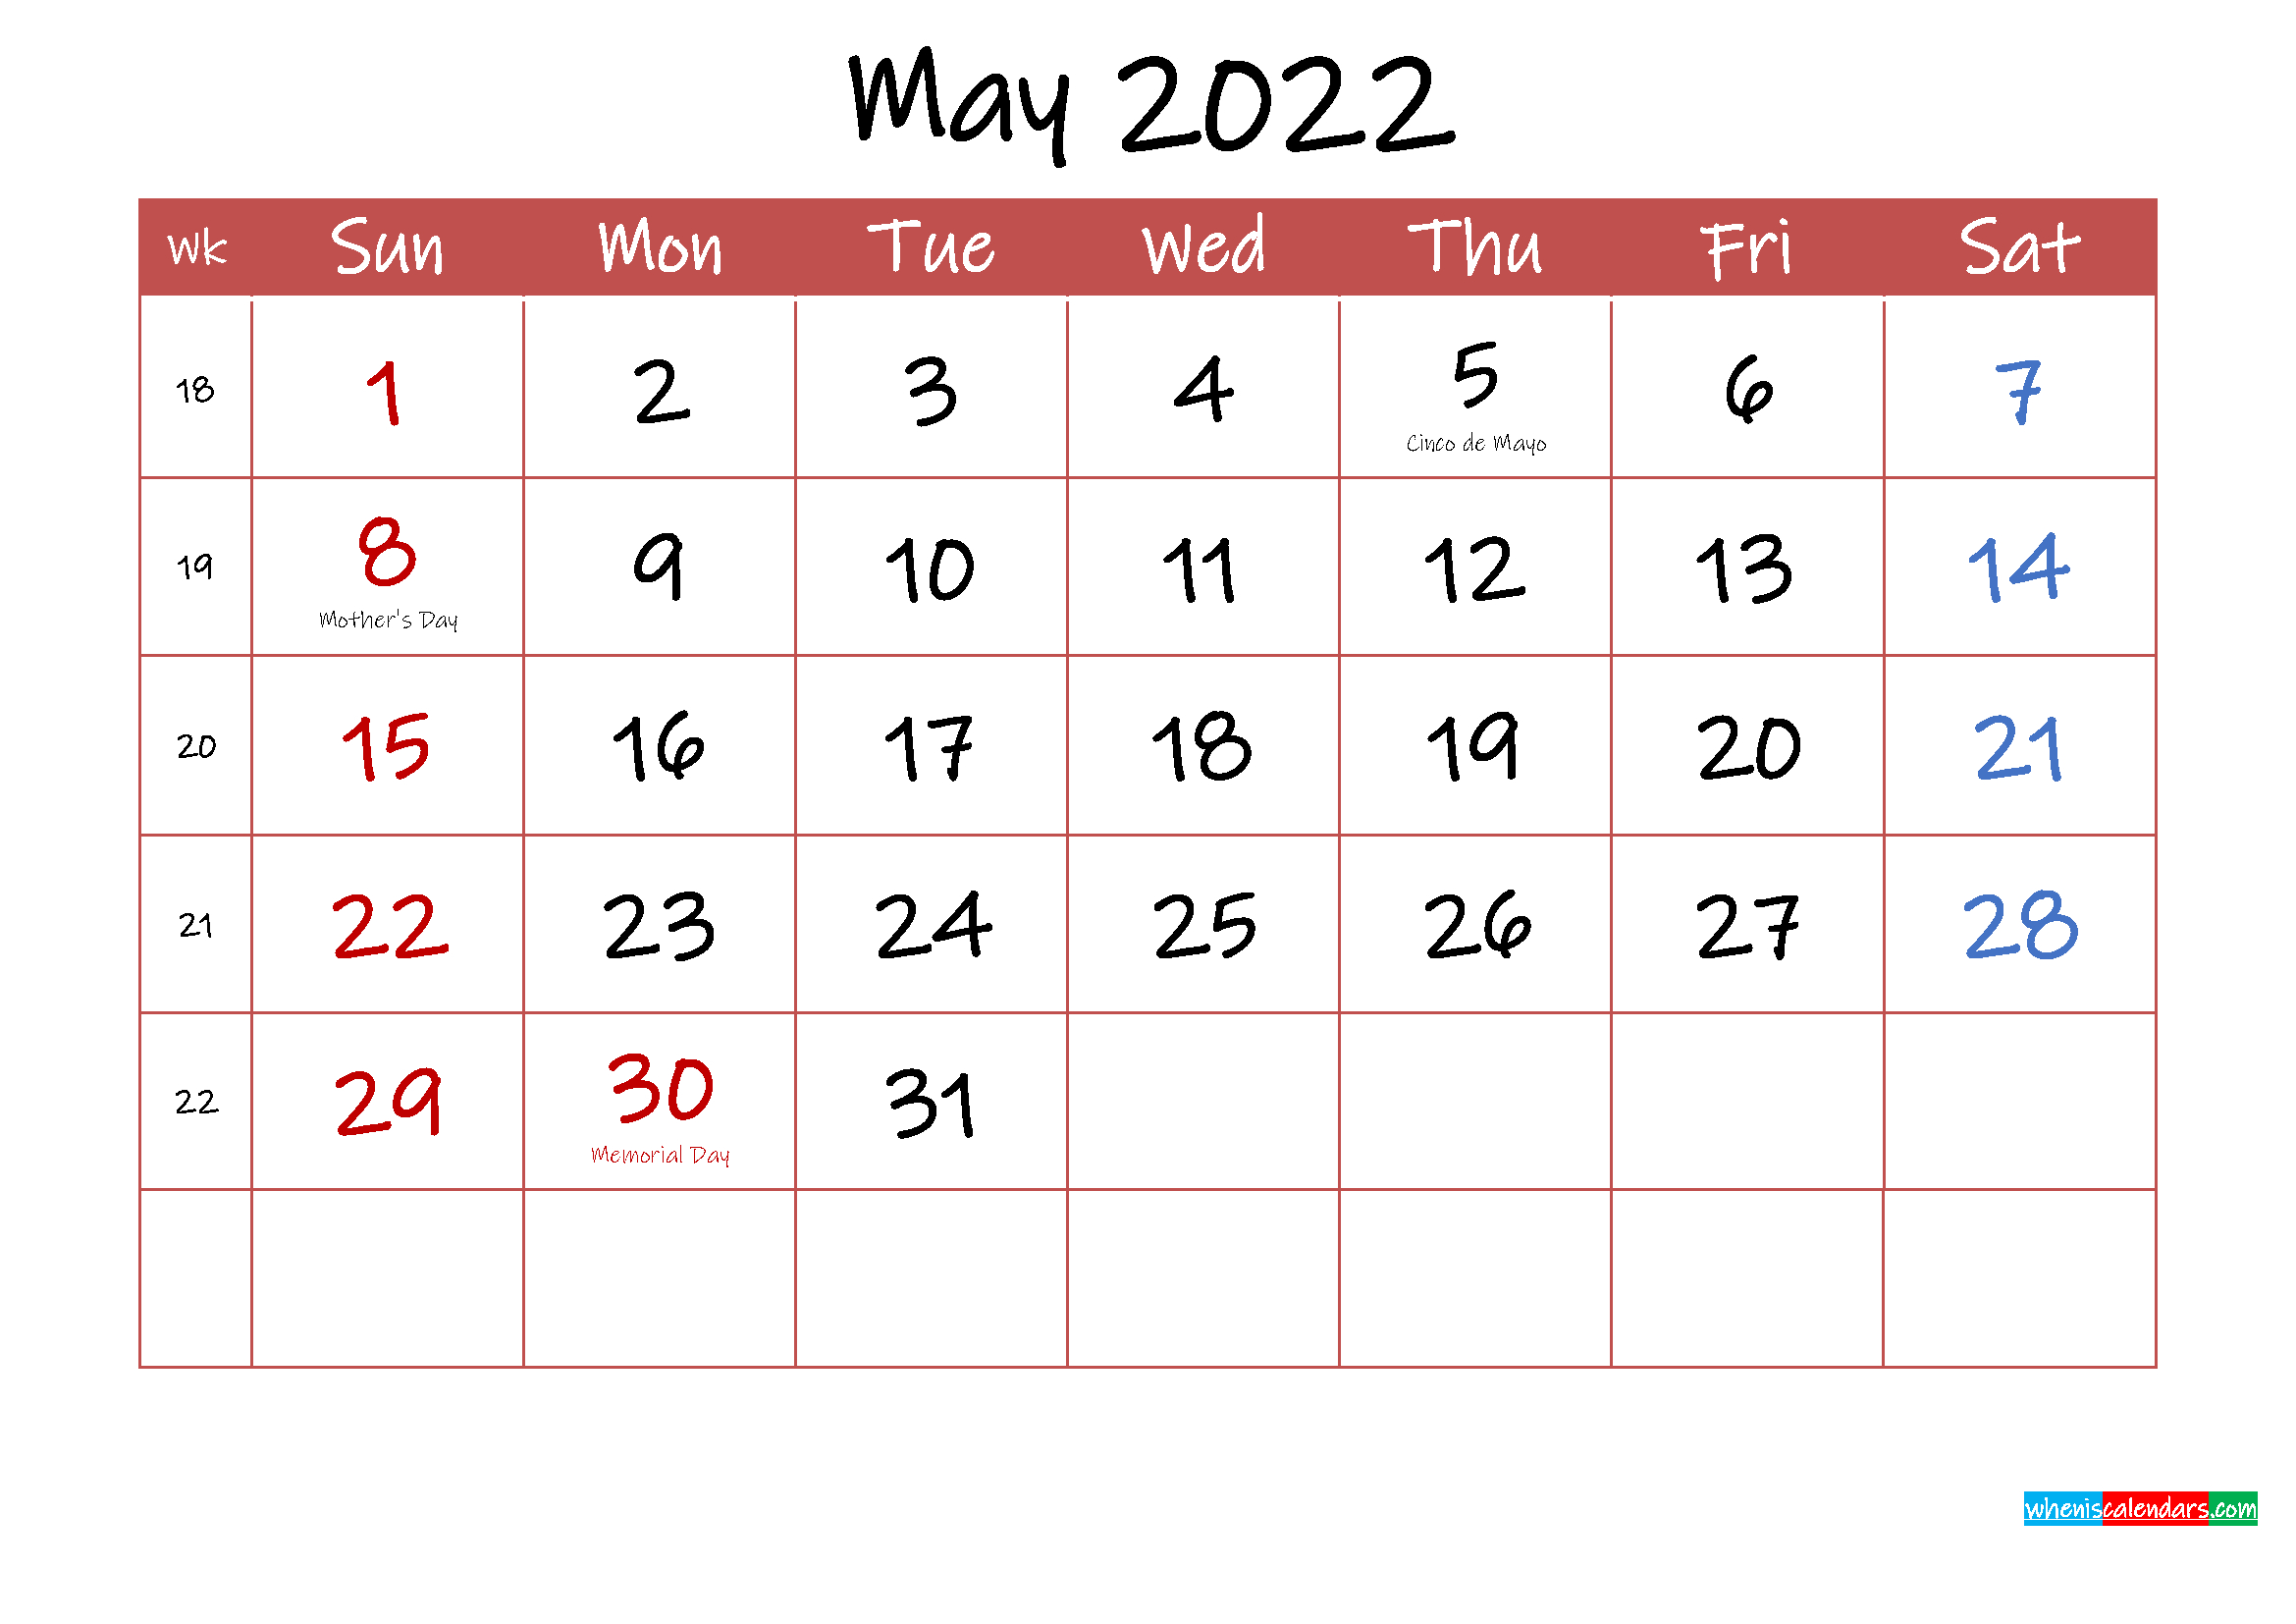 Printable May 2022 Calendar With Holidays - Template Ink22M29  May Calendar For 2022